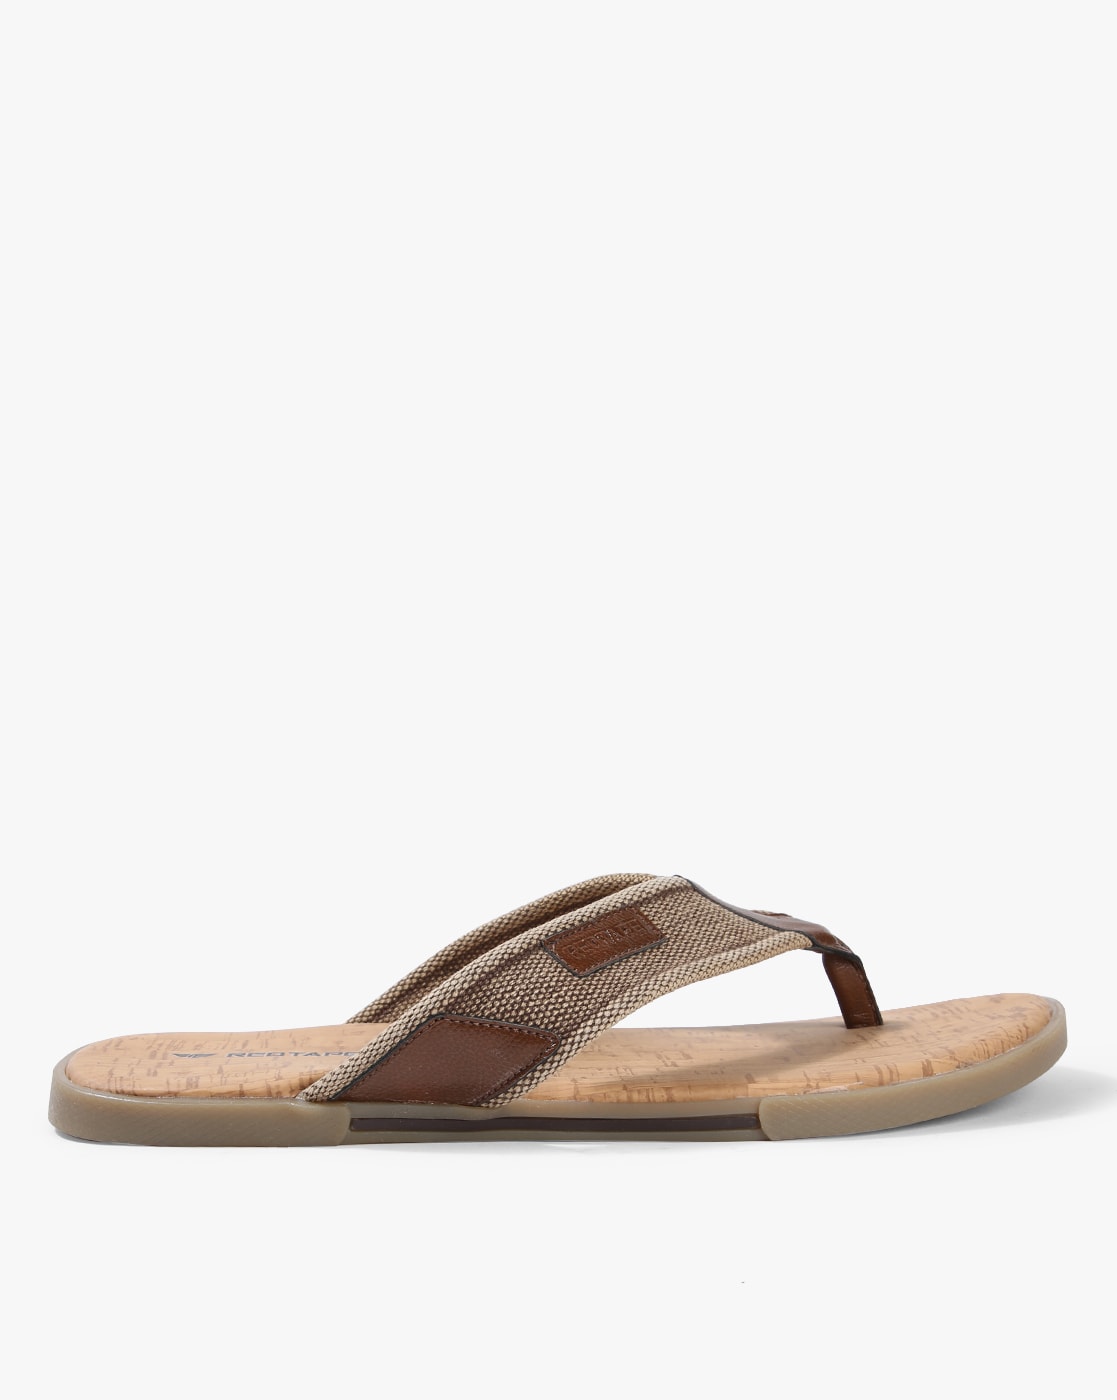 red tape men's hawaii thong sandals